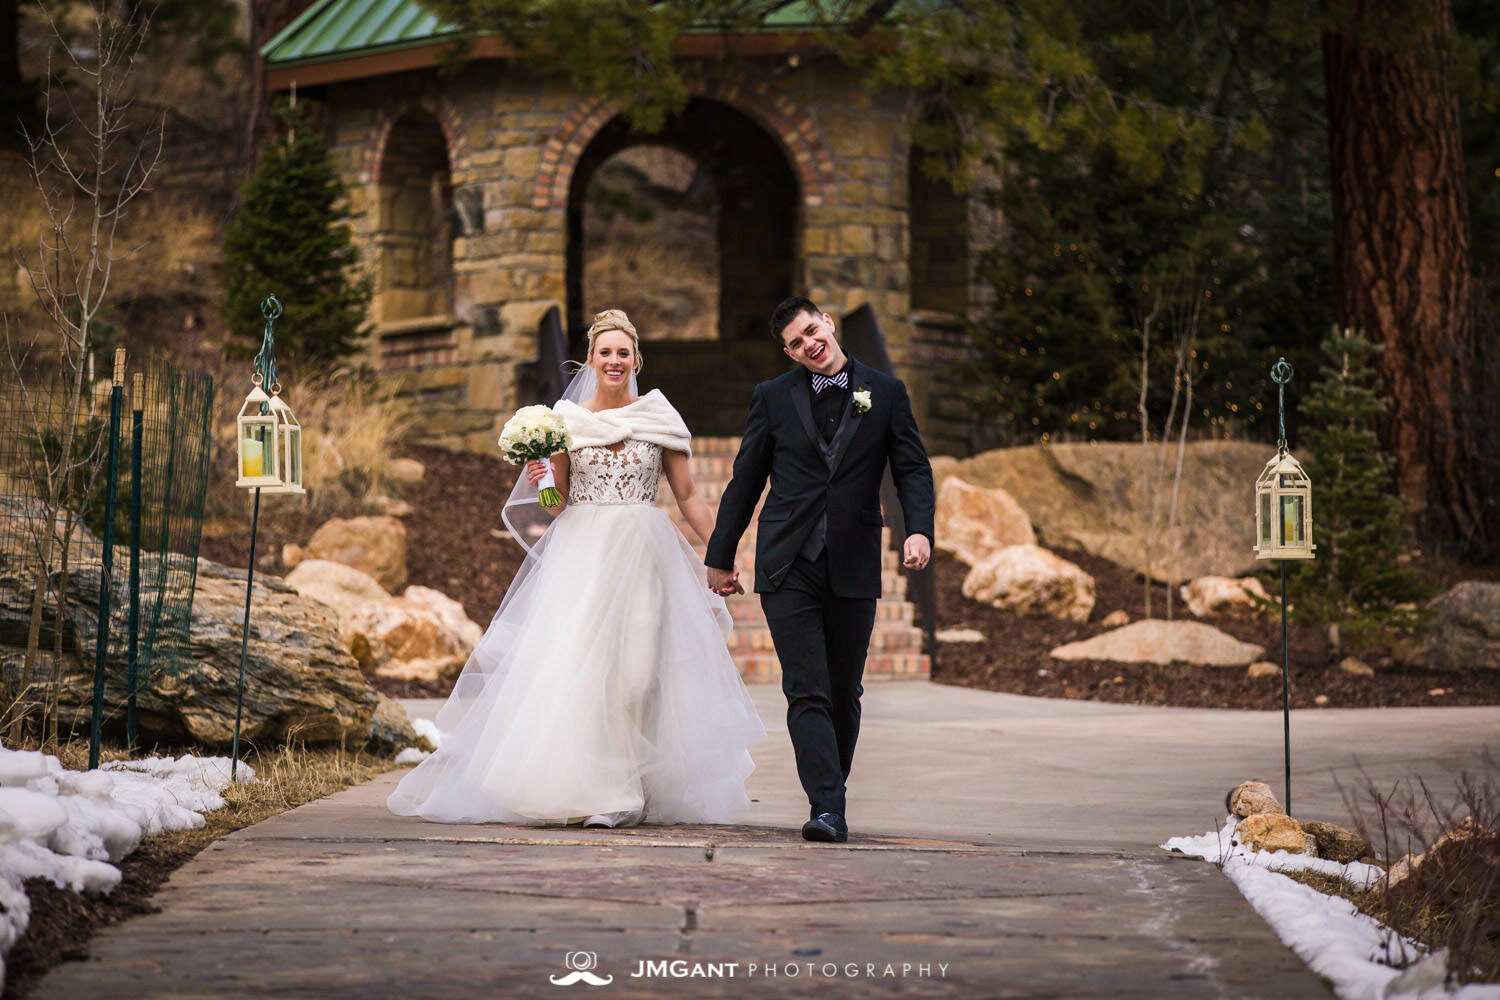  Stunning elegant wedding at the Della Terra Mountain Chateau in Estes Park Colorado. Photographed by Jared M. Gant of JMGant Photography. 